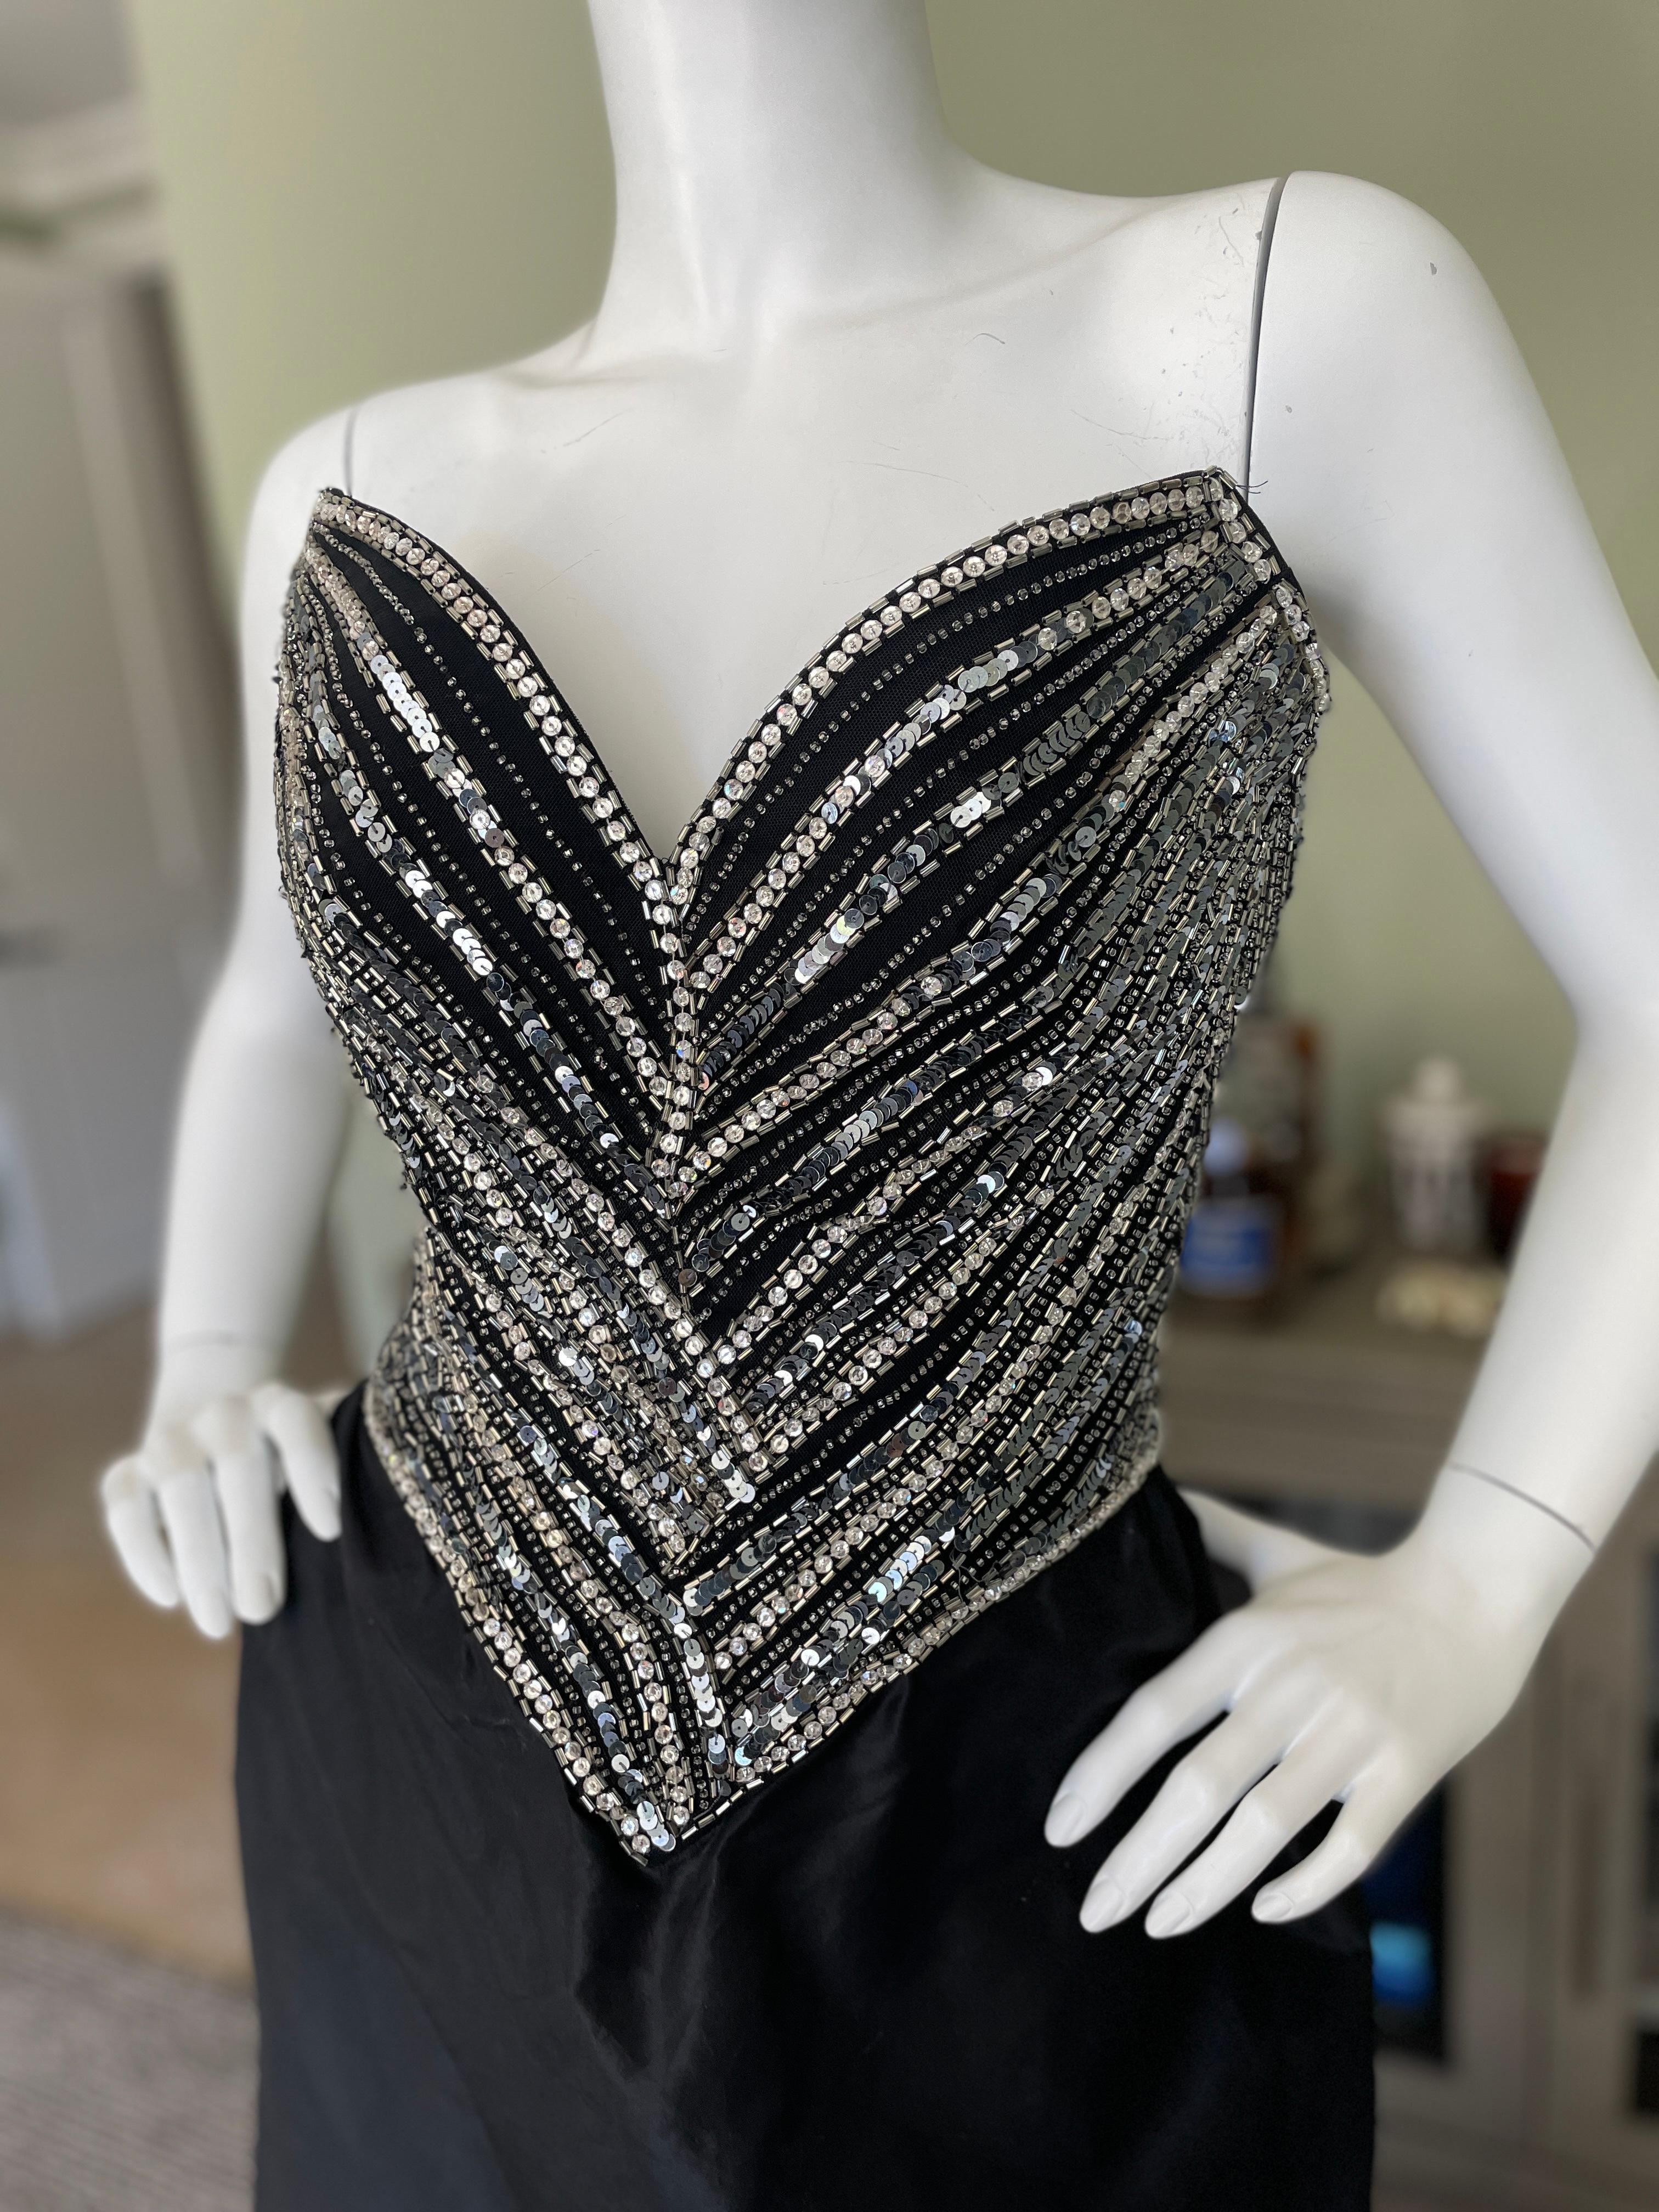 Bob Mackie for Martha Park Avenue Vintage Embellished Corset Cocktail Dress   In Excellent Condition For Sale In Cloverdale, CA